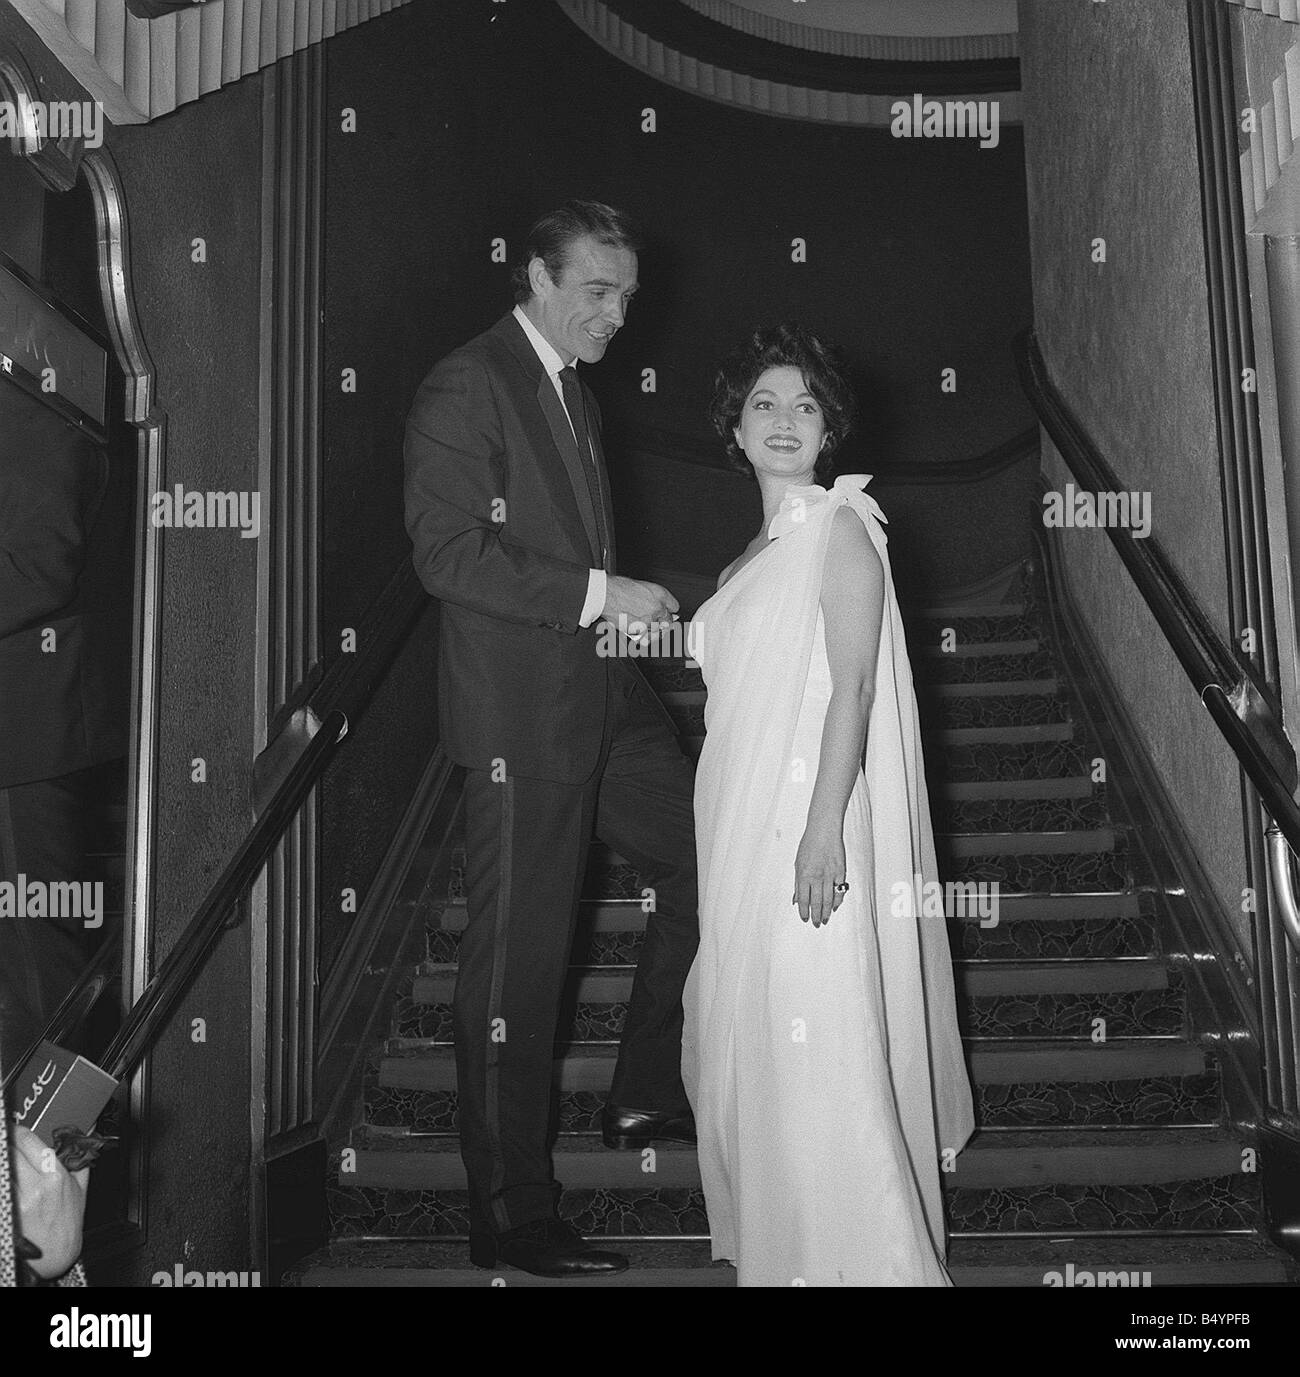 Sean Connery and Zena Marshal at film premiere of Dr No in London in 1962 8  3 99 Q8082 Box 143 Scottish smoothie Sean Connery at the premiere of Dr No  the